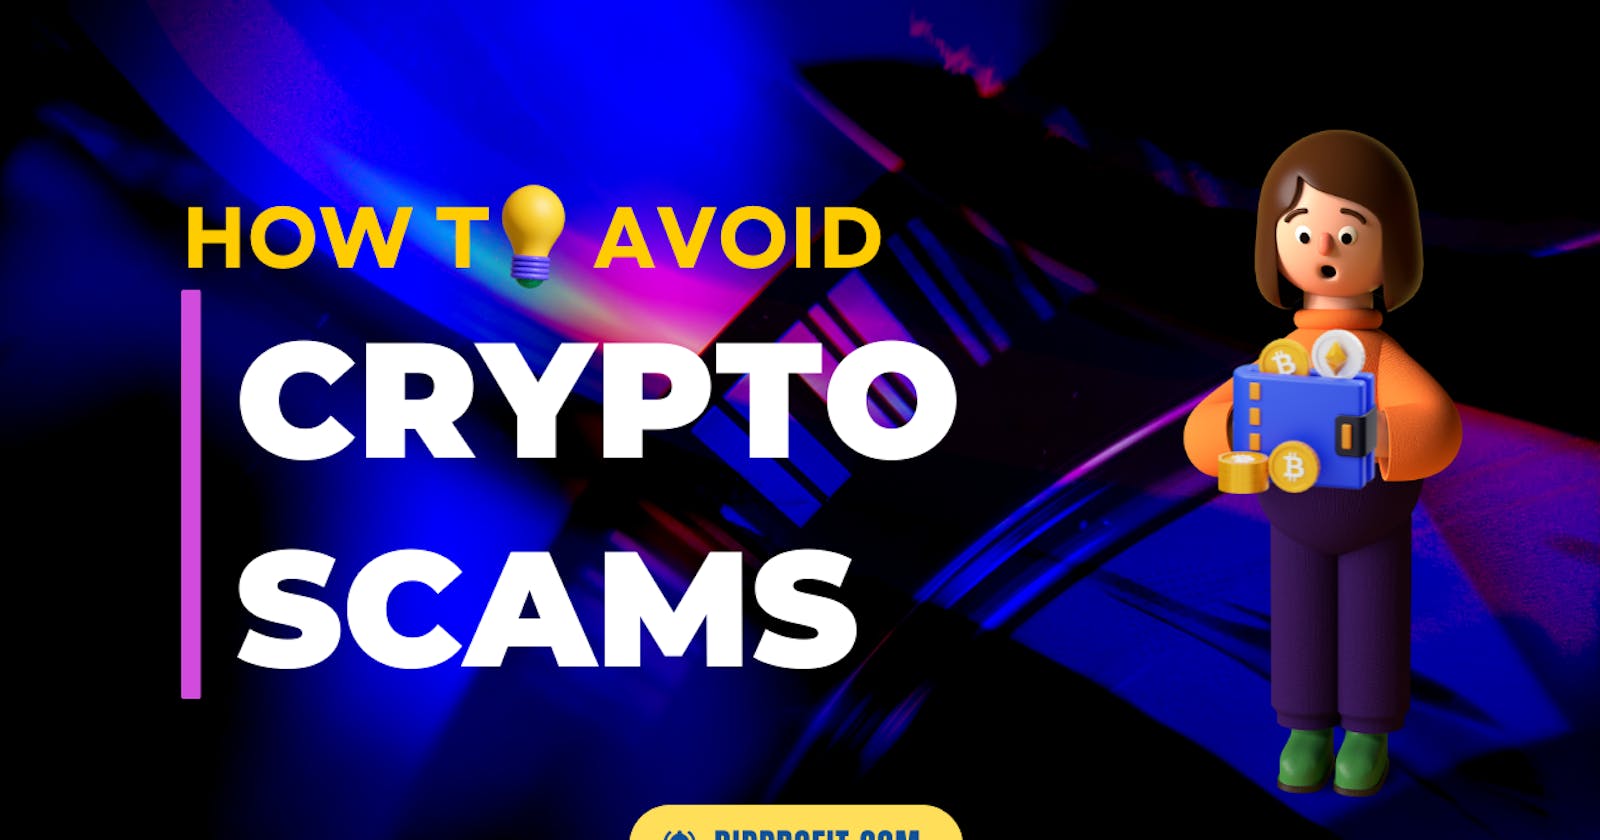 3 ways to spot and avoid crypto scams in 2023